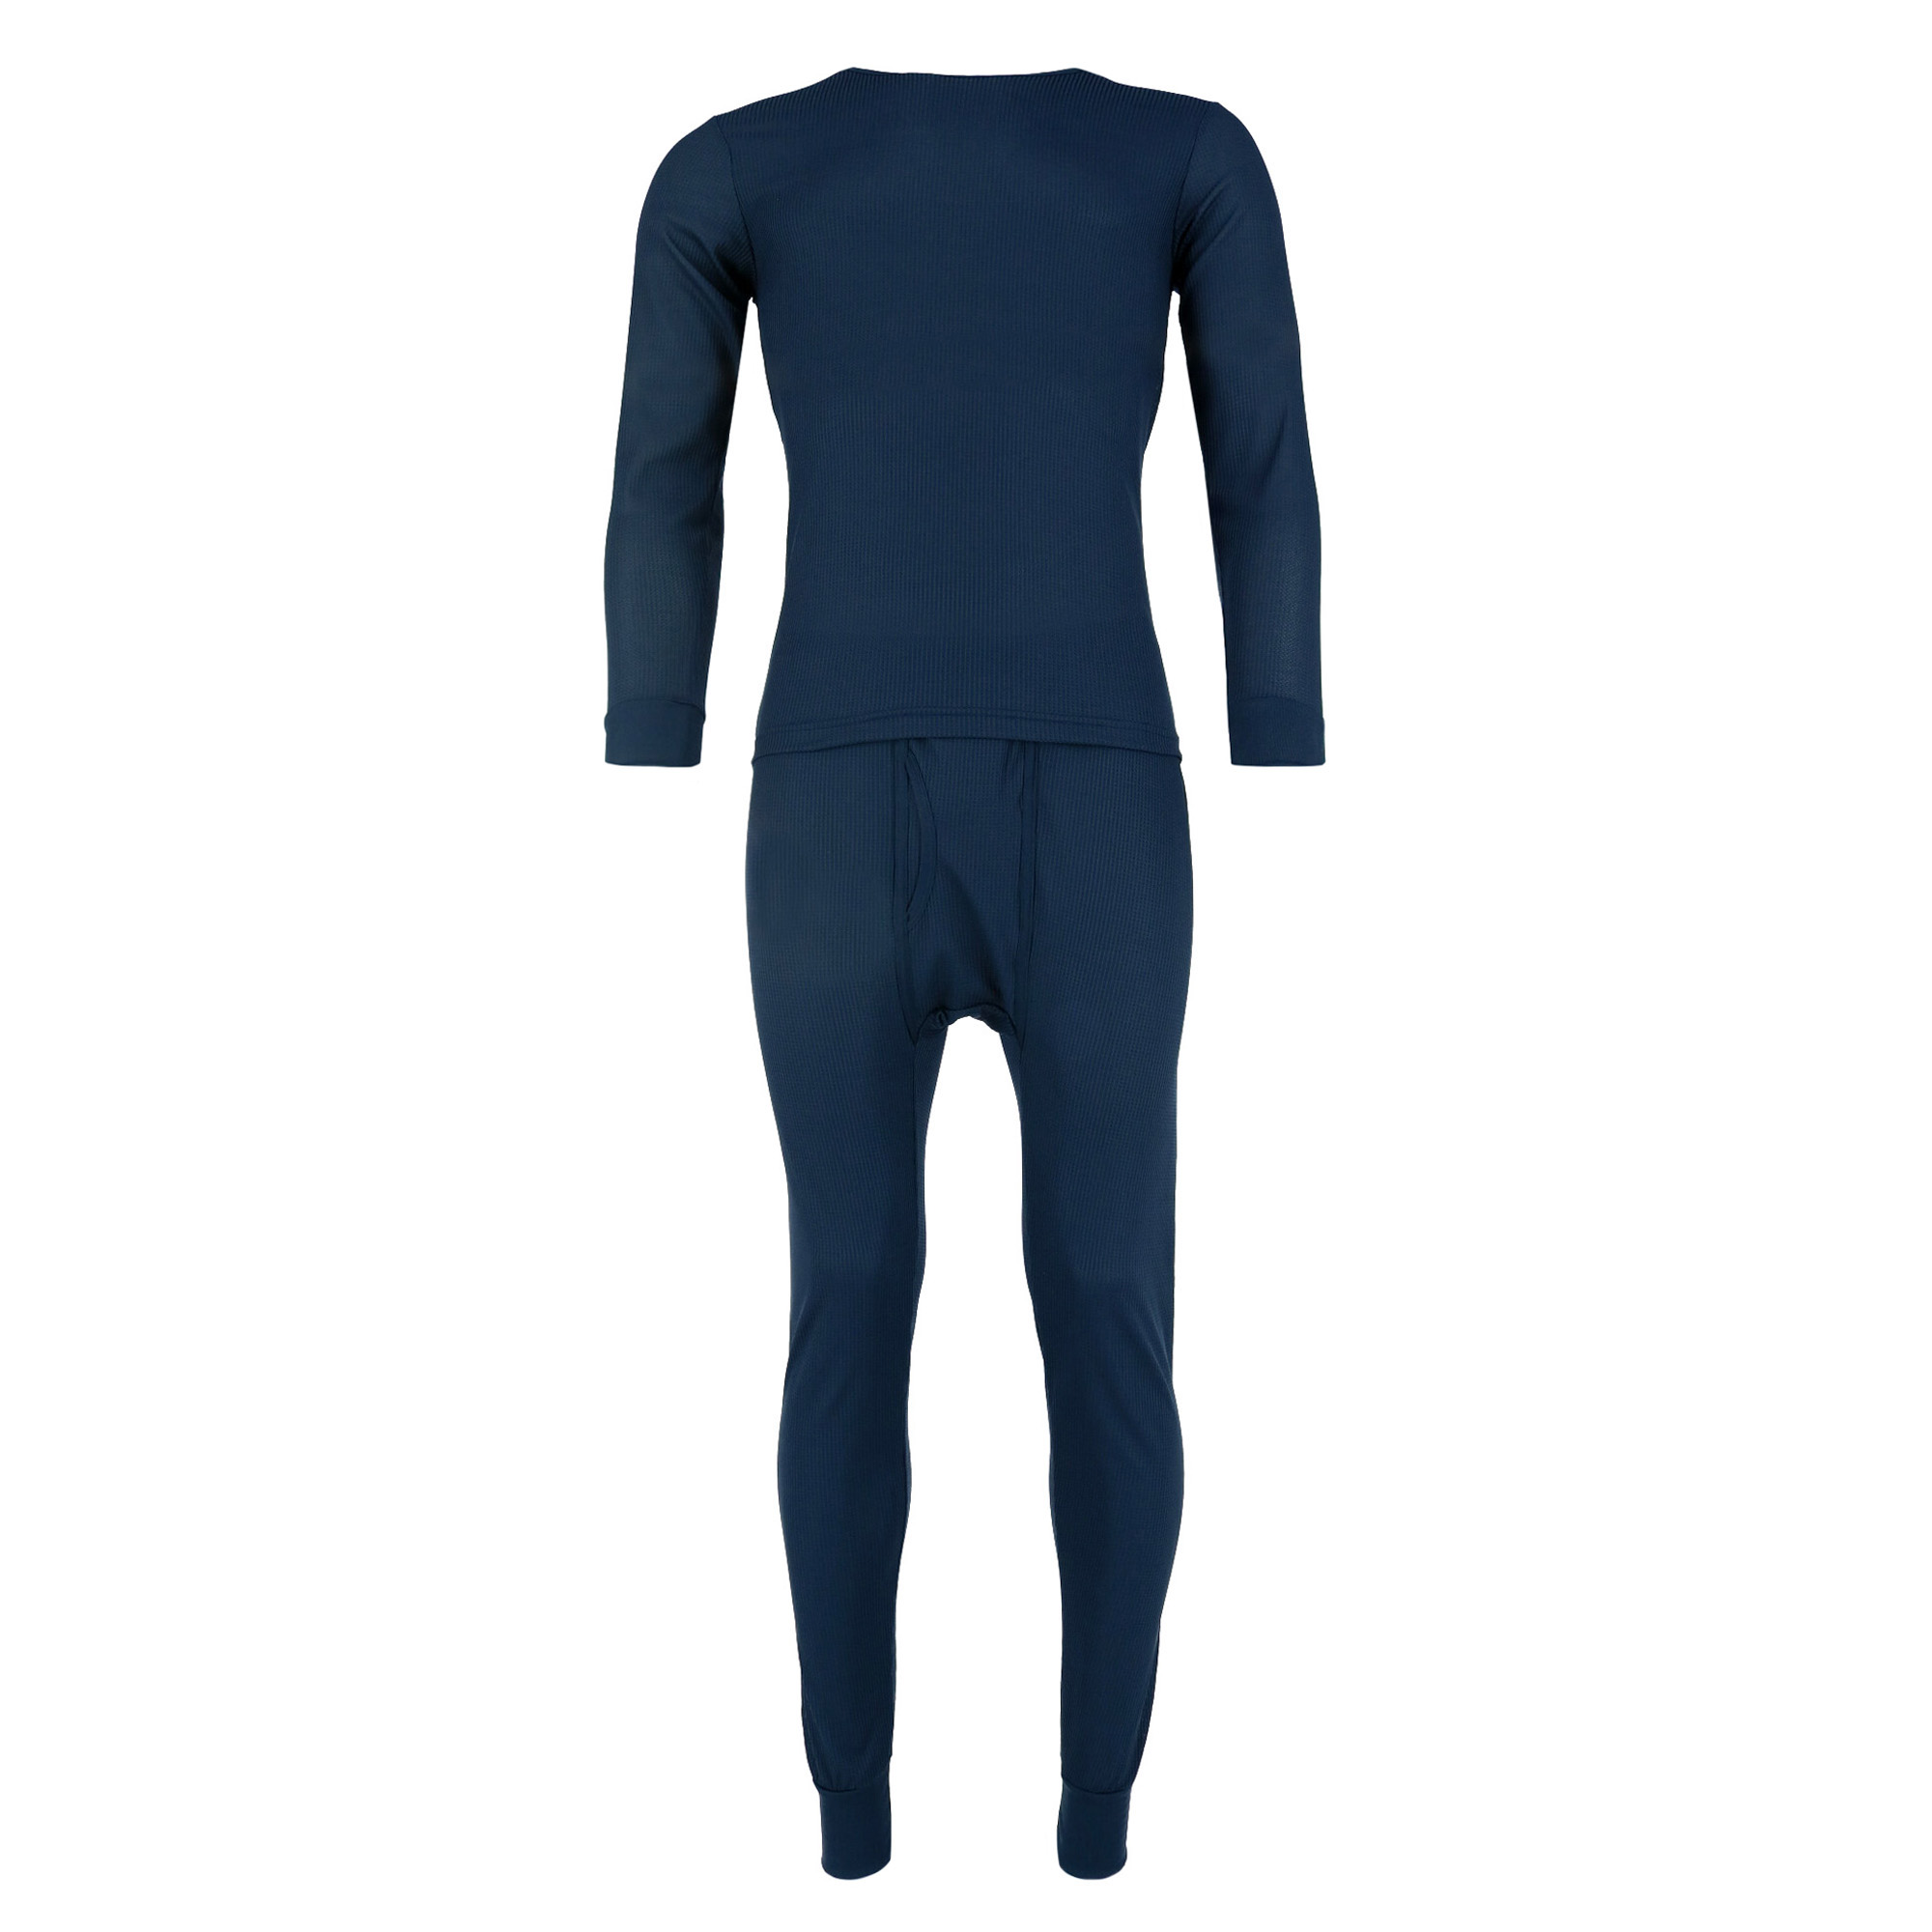 mens thermal underwear from Kmart.com